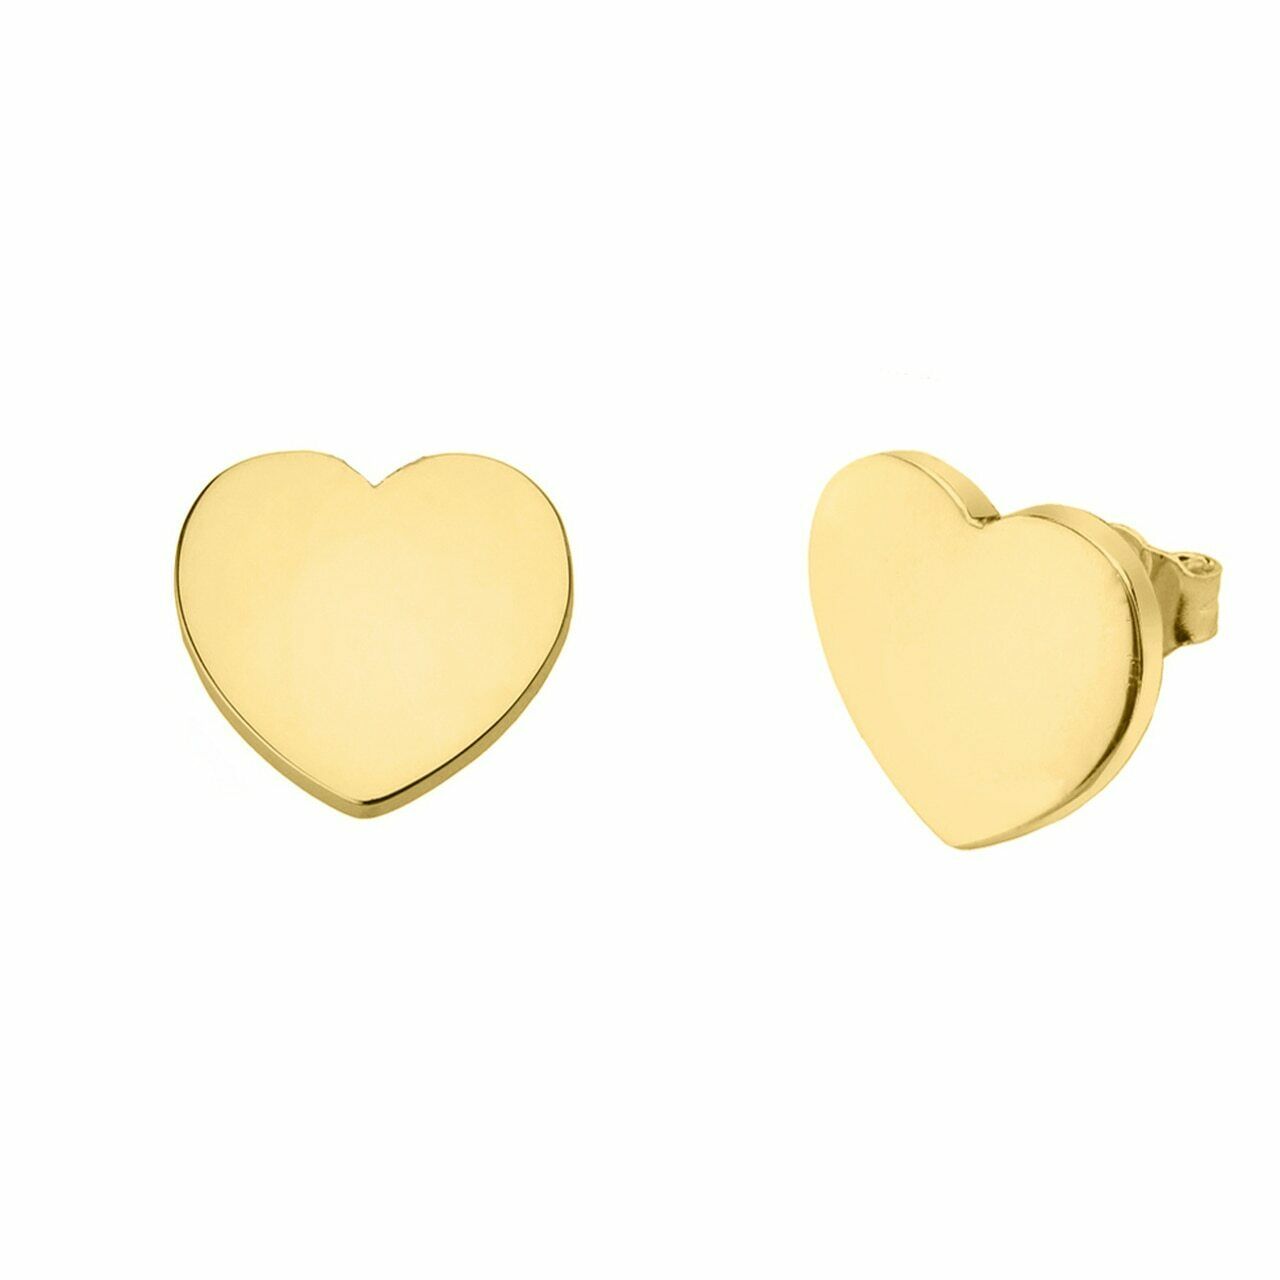 10k Solid Yellow Gold Plain Simple Small Heart Stud Earrings